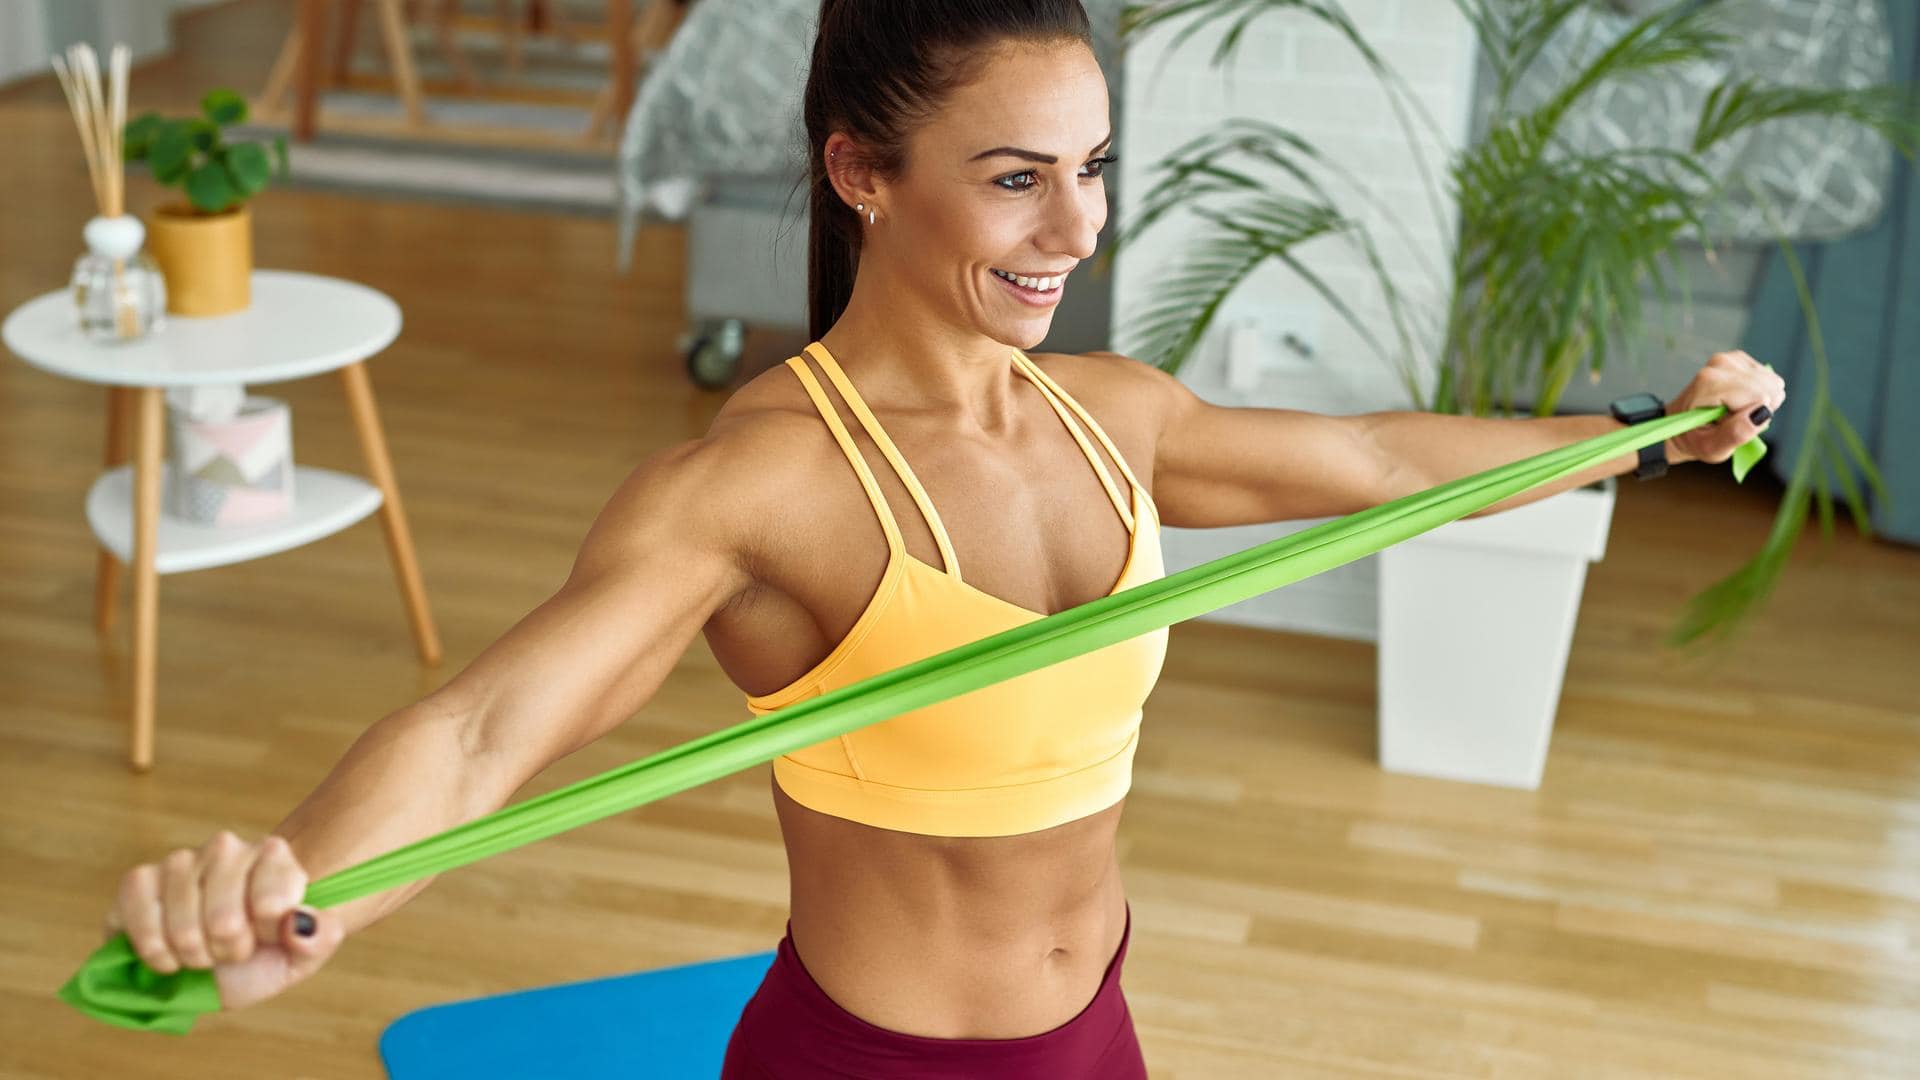 Exercises with resistance bands to tone your arms